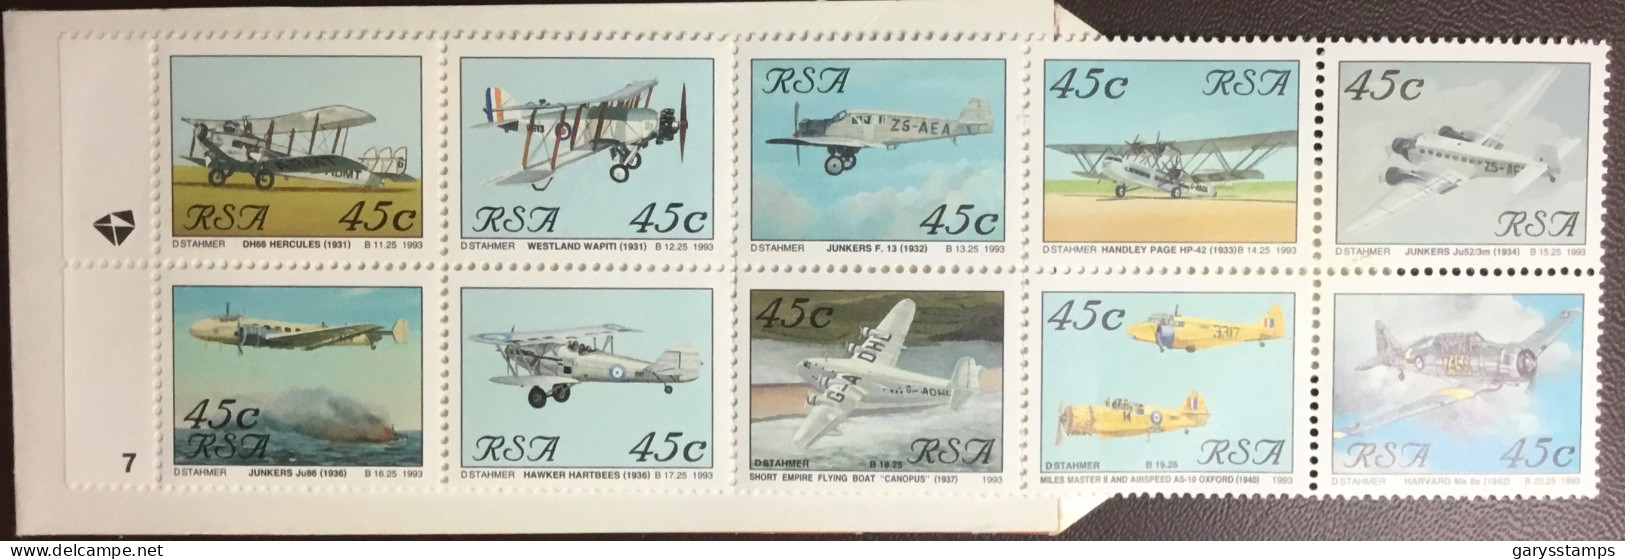 South Africa 1993 Aviation Booklet Pane 7 Booklet Unused - Libretti